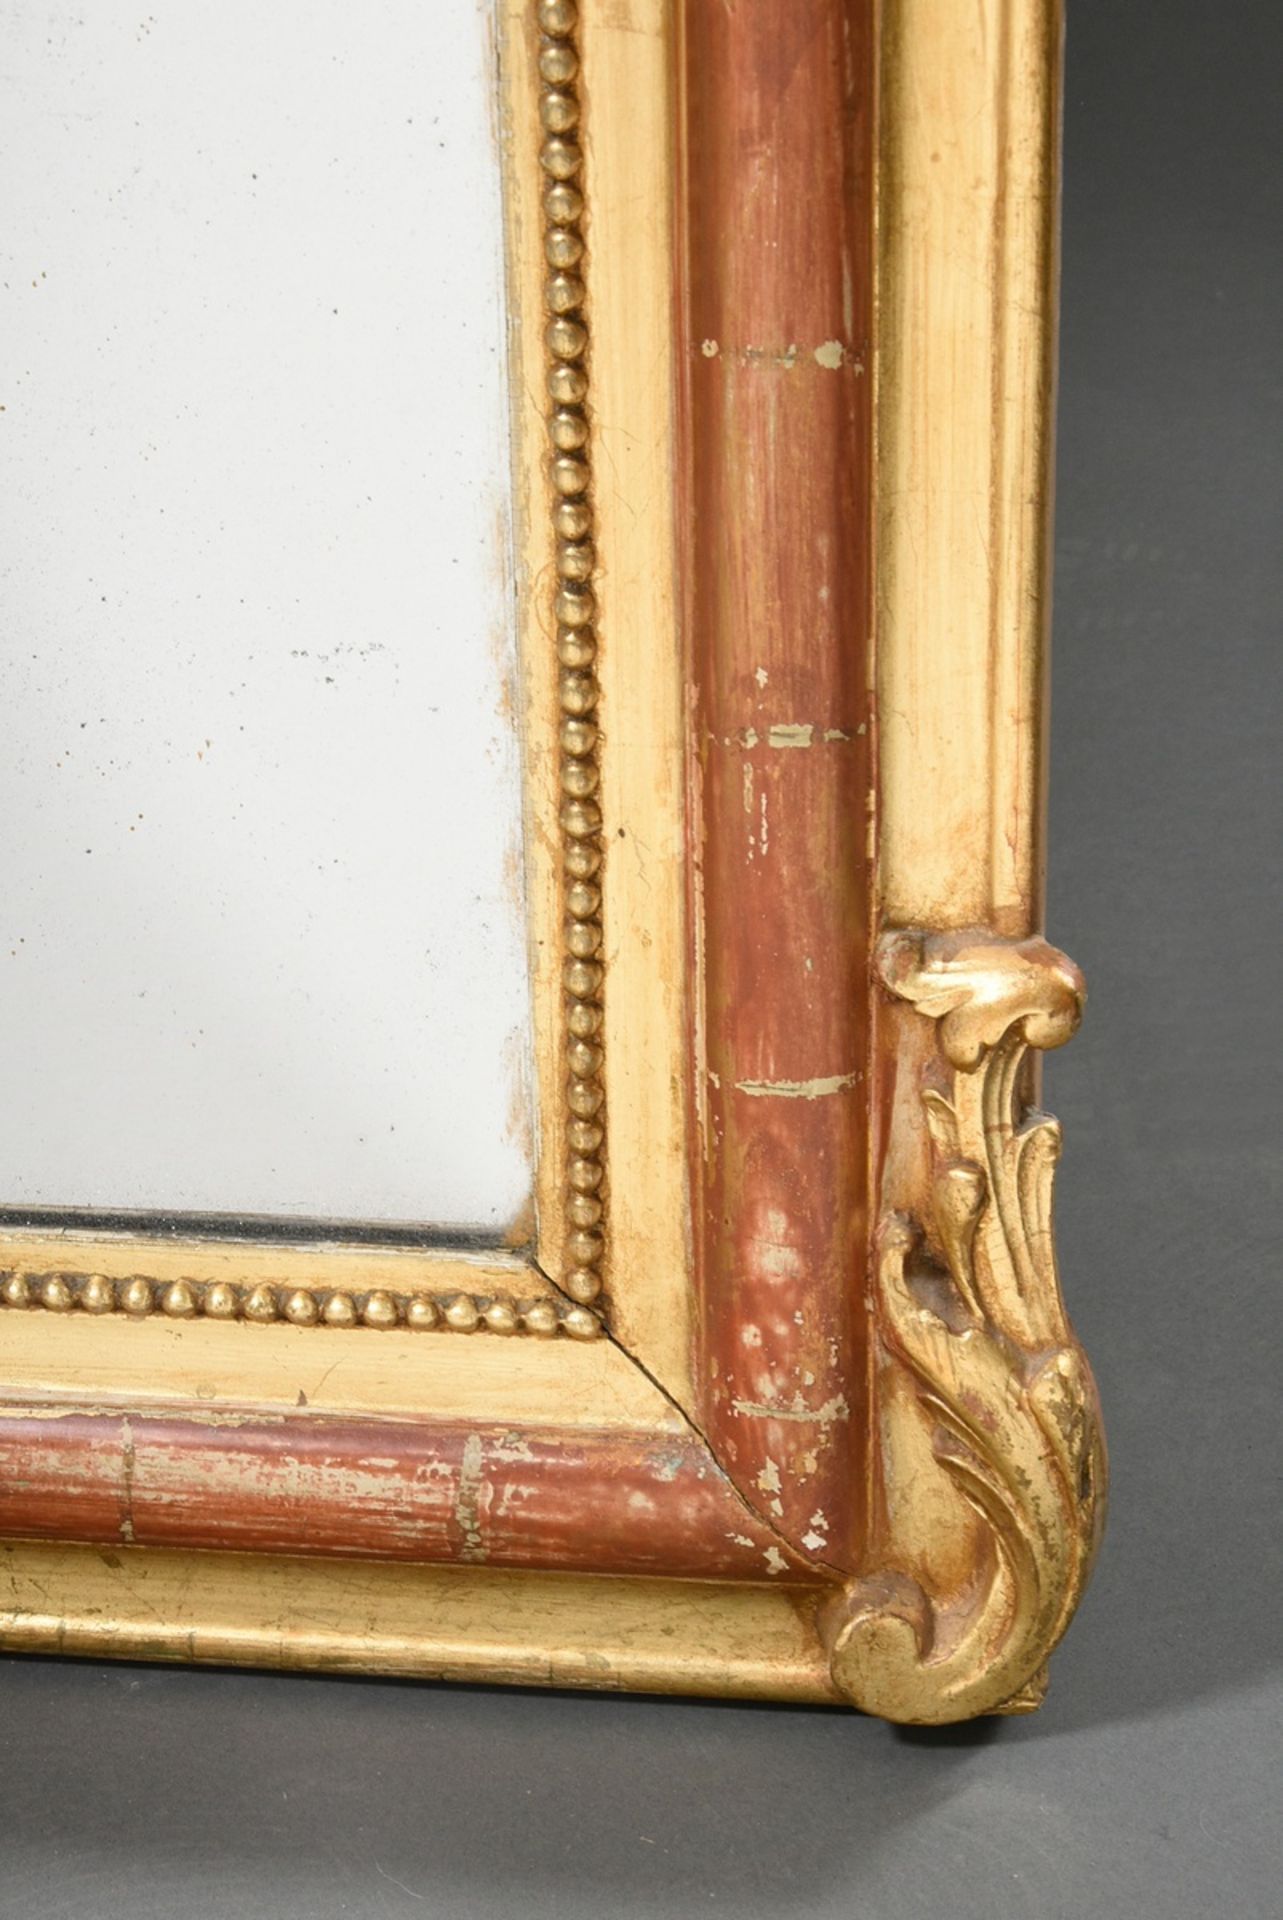 French fireplace mirror with figural decoration "Putti with vase", stucco gilded over bolus ground, - Image 3 of 4